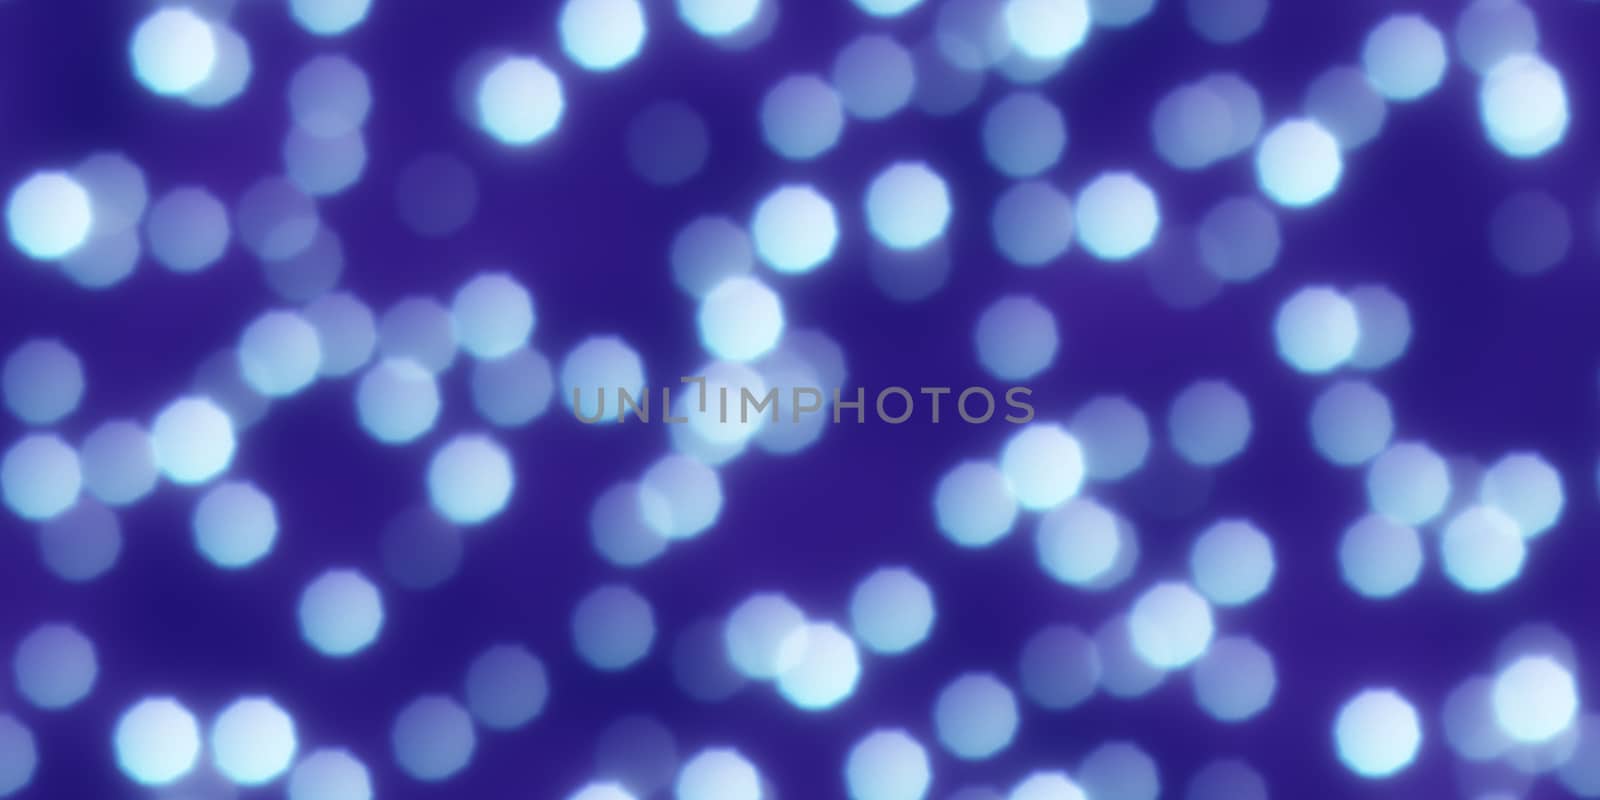 Dark Blue Polygon Shape Bokeh Background. Abstract Figure Night Lights Texture. Abstract Glowing Forms Backdrop.